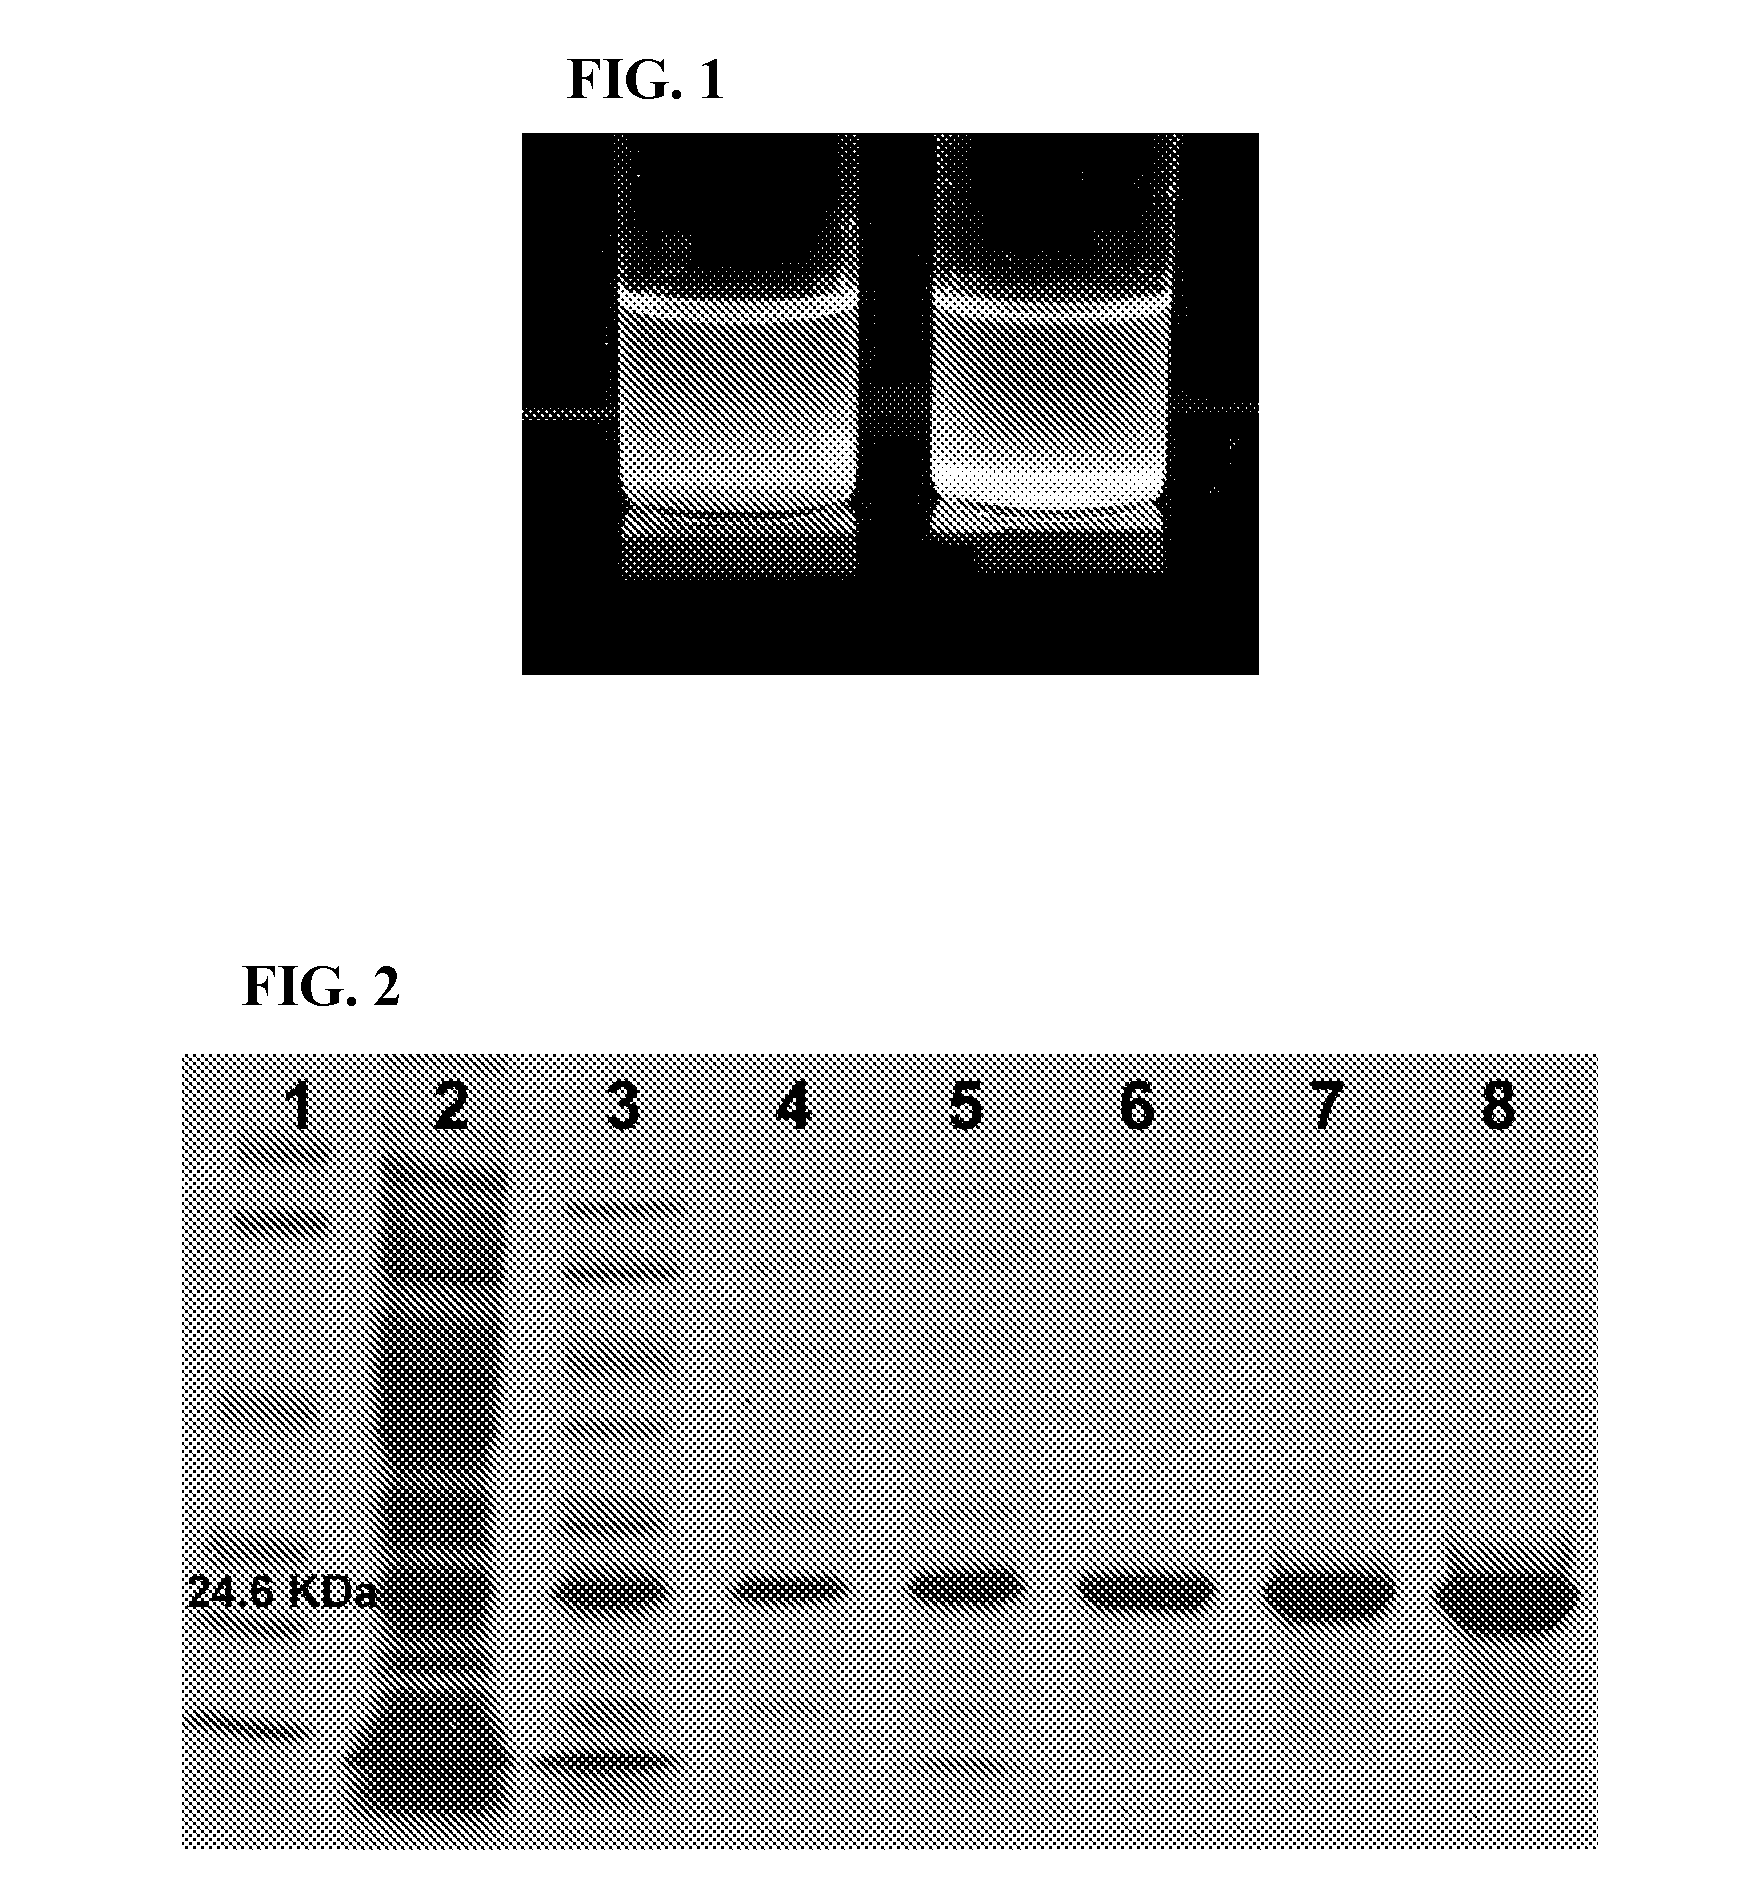 Optical fingerprinting of nucleic acid sequences